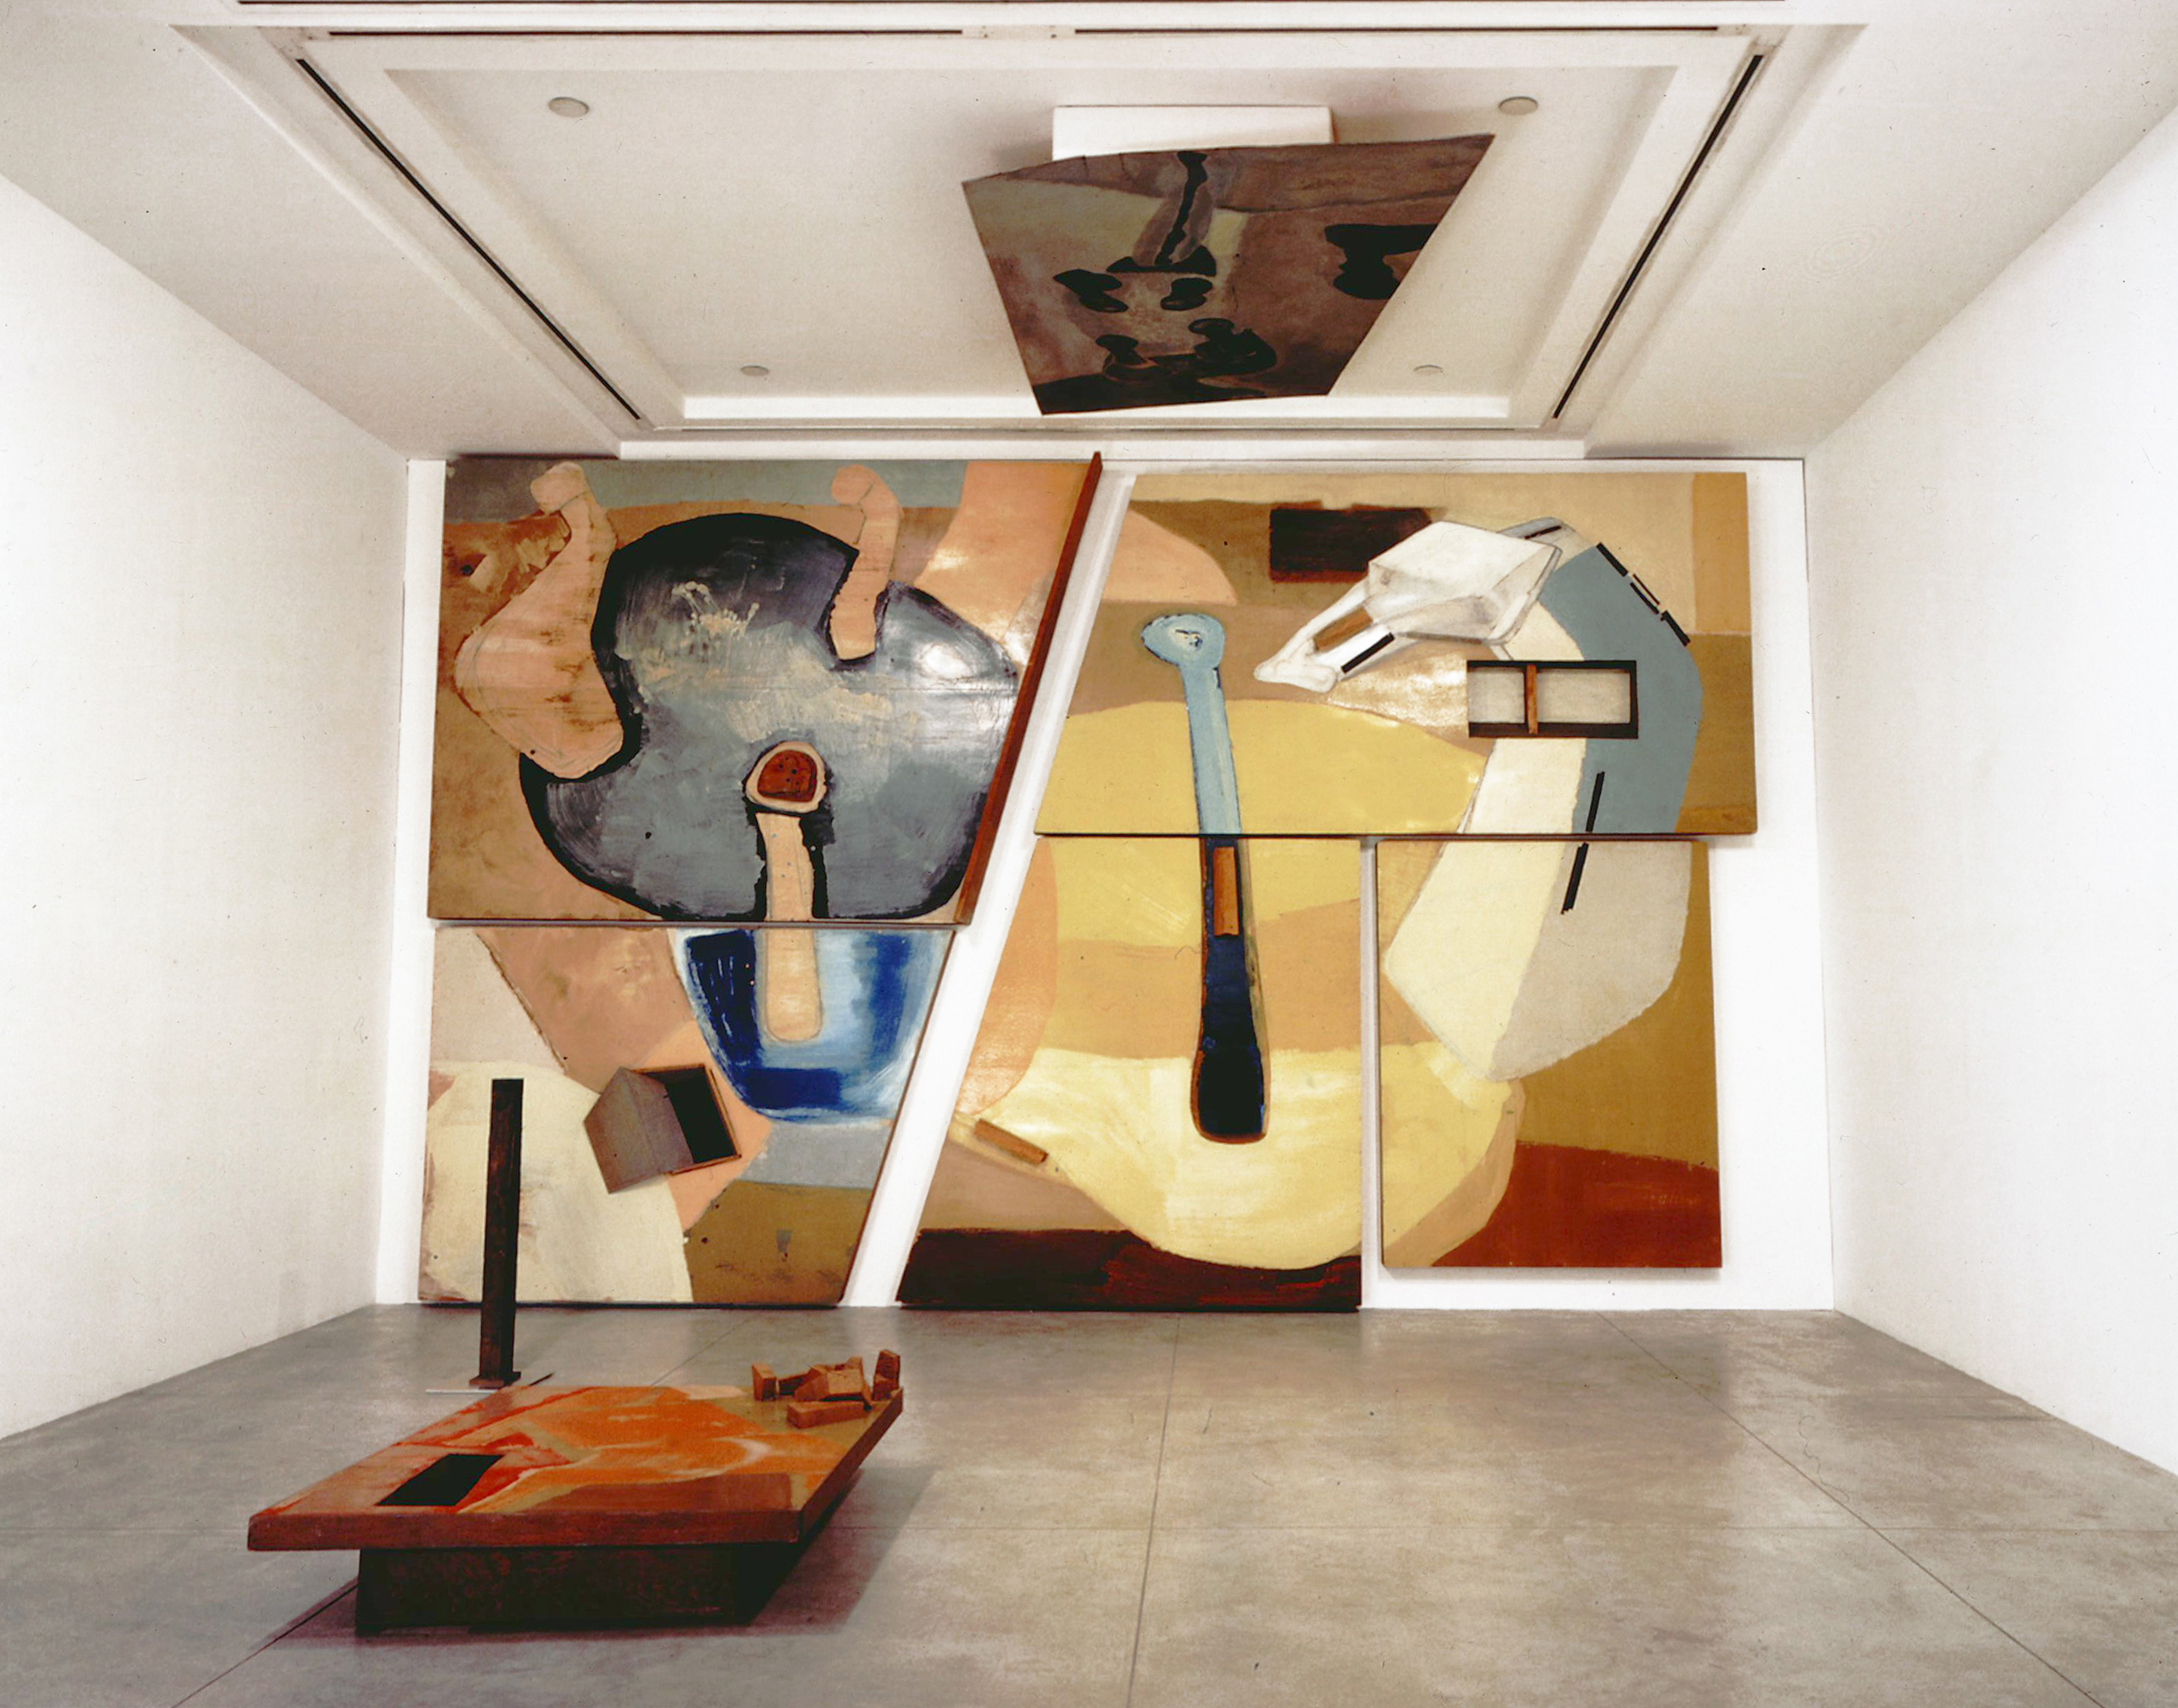   Frederick Kiesler  (1890-1965)  Large Horse Galaxy , 1954 Mixed media installation consisting of six wall panels, one table, one floor piece and one ceiling piece. Dimensions vary. Nine separate elements. 